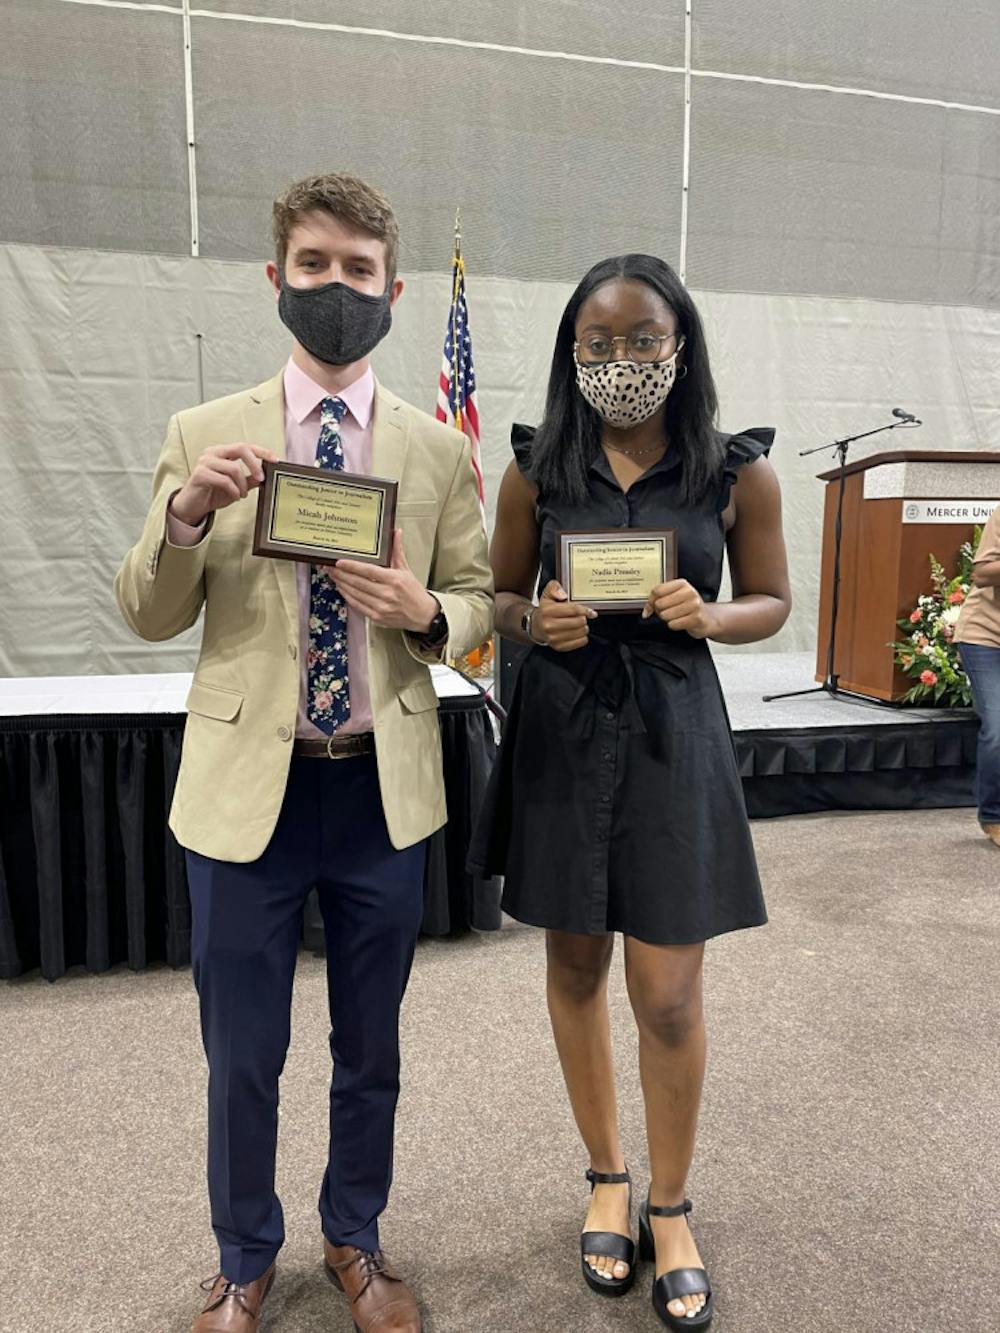 Sports Editor Micah Johnston (left) was named the Outstanding Junior in Journalism and Nadia Pressley (right) was named the Outstanding Senior in Journalism at Honors Convocation March 26. Photo provided by Nadia Pressley